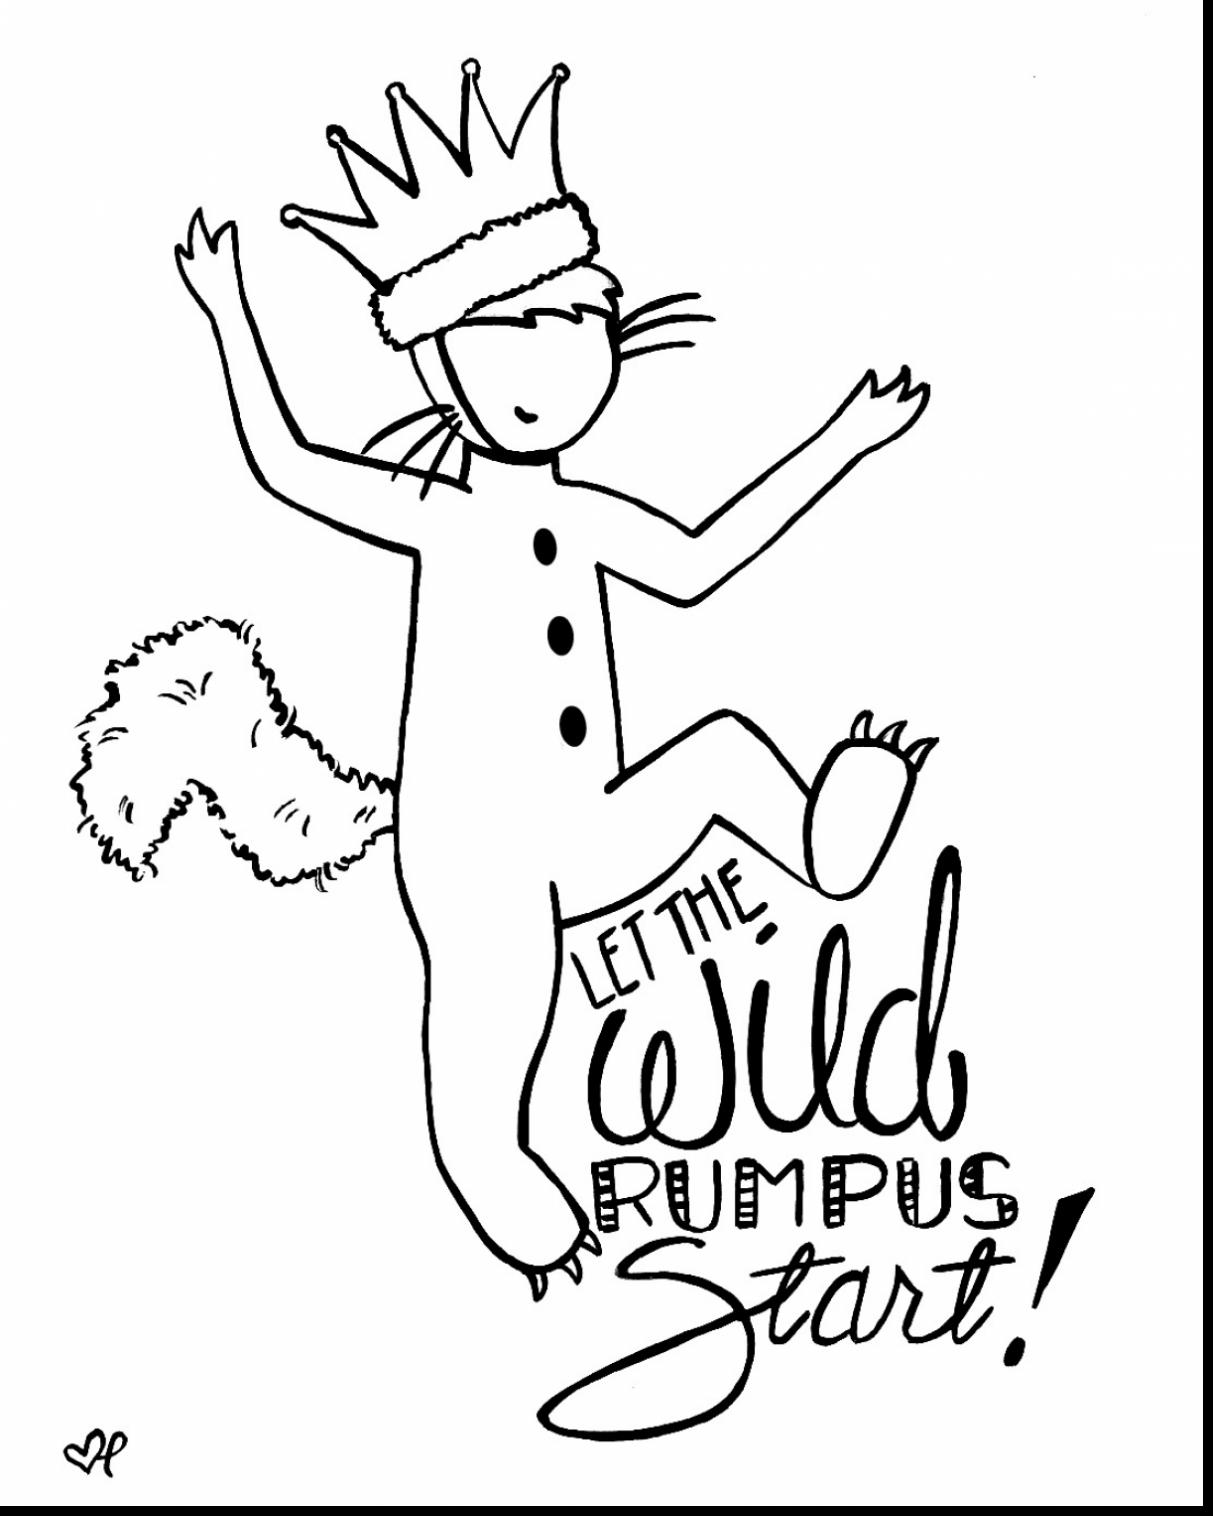 Where The Wild Things Are Characters Coloring Pages at GetDrawings